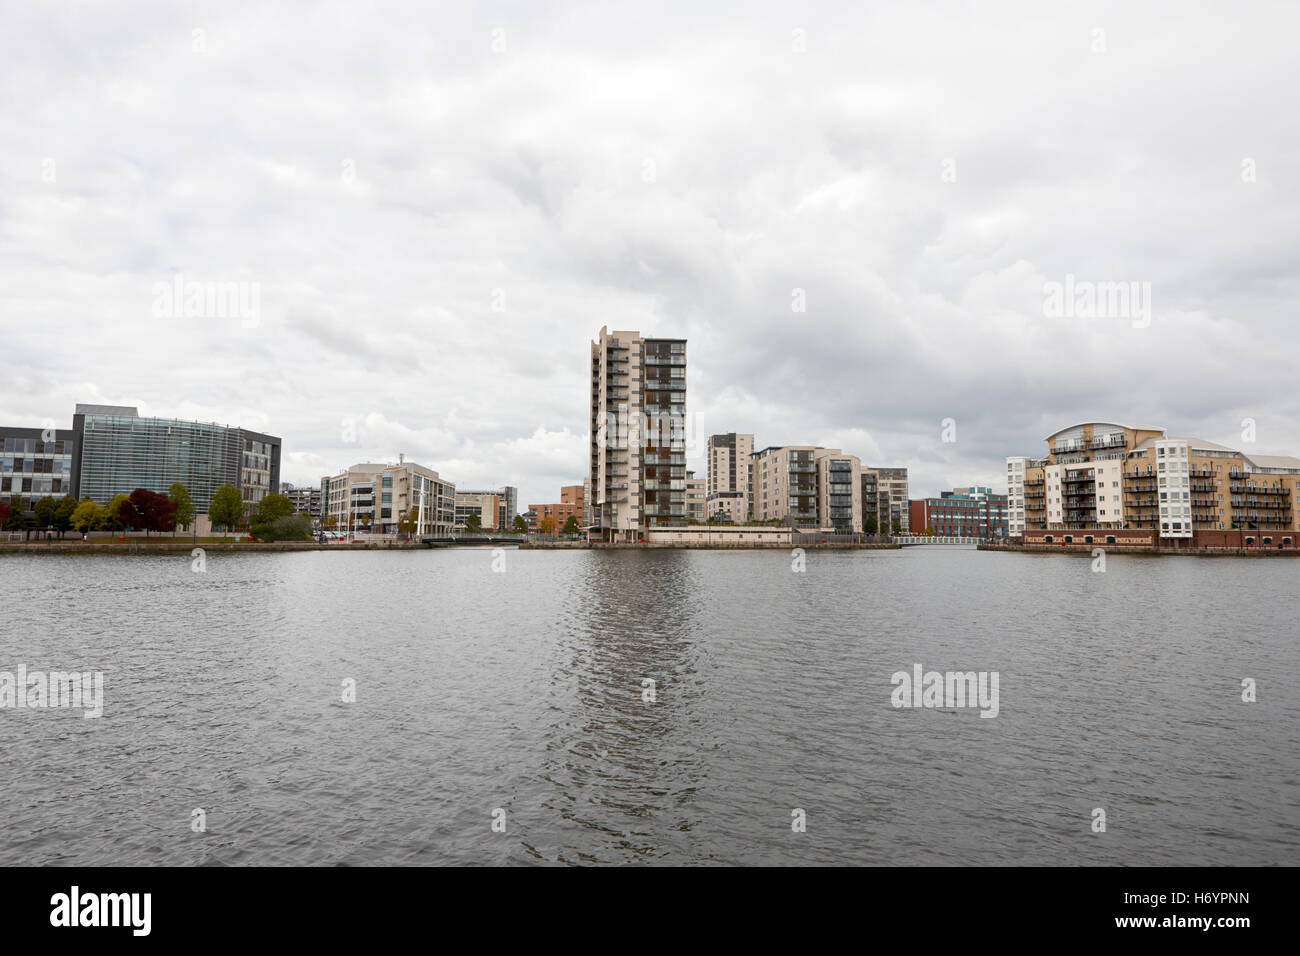 commercial, celestia and adventurers quay luxury apartment buildings on roath basin on overcast day Cardiff bay Wales United Kin Stock Photo